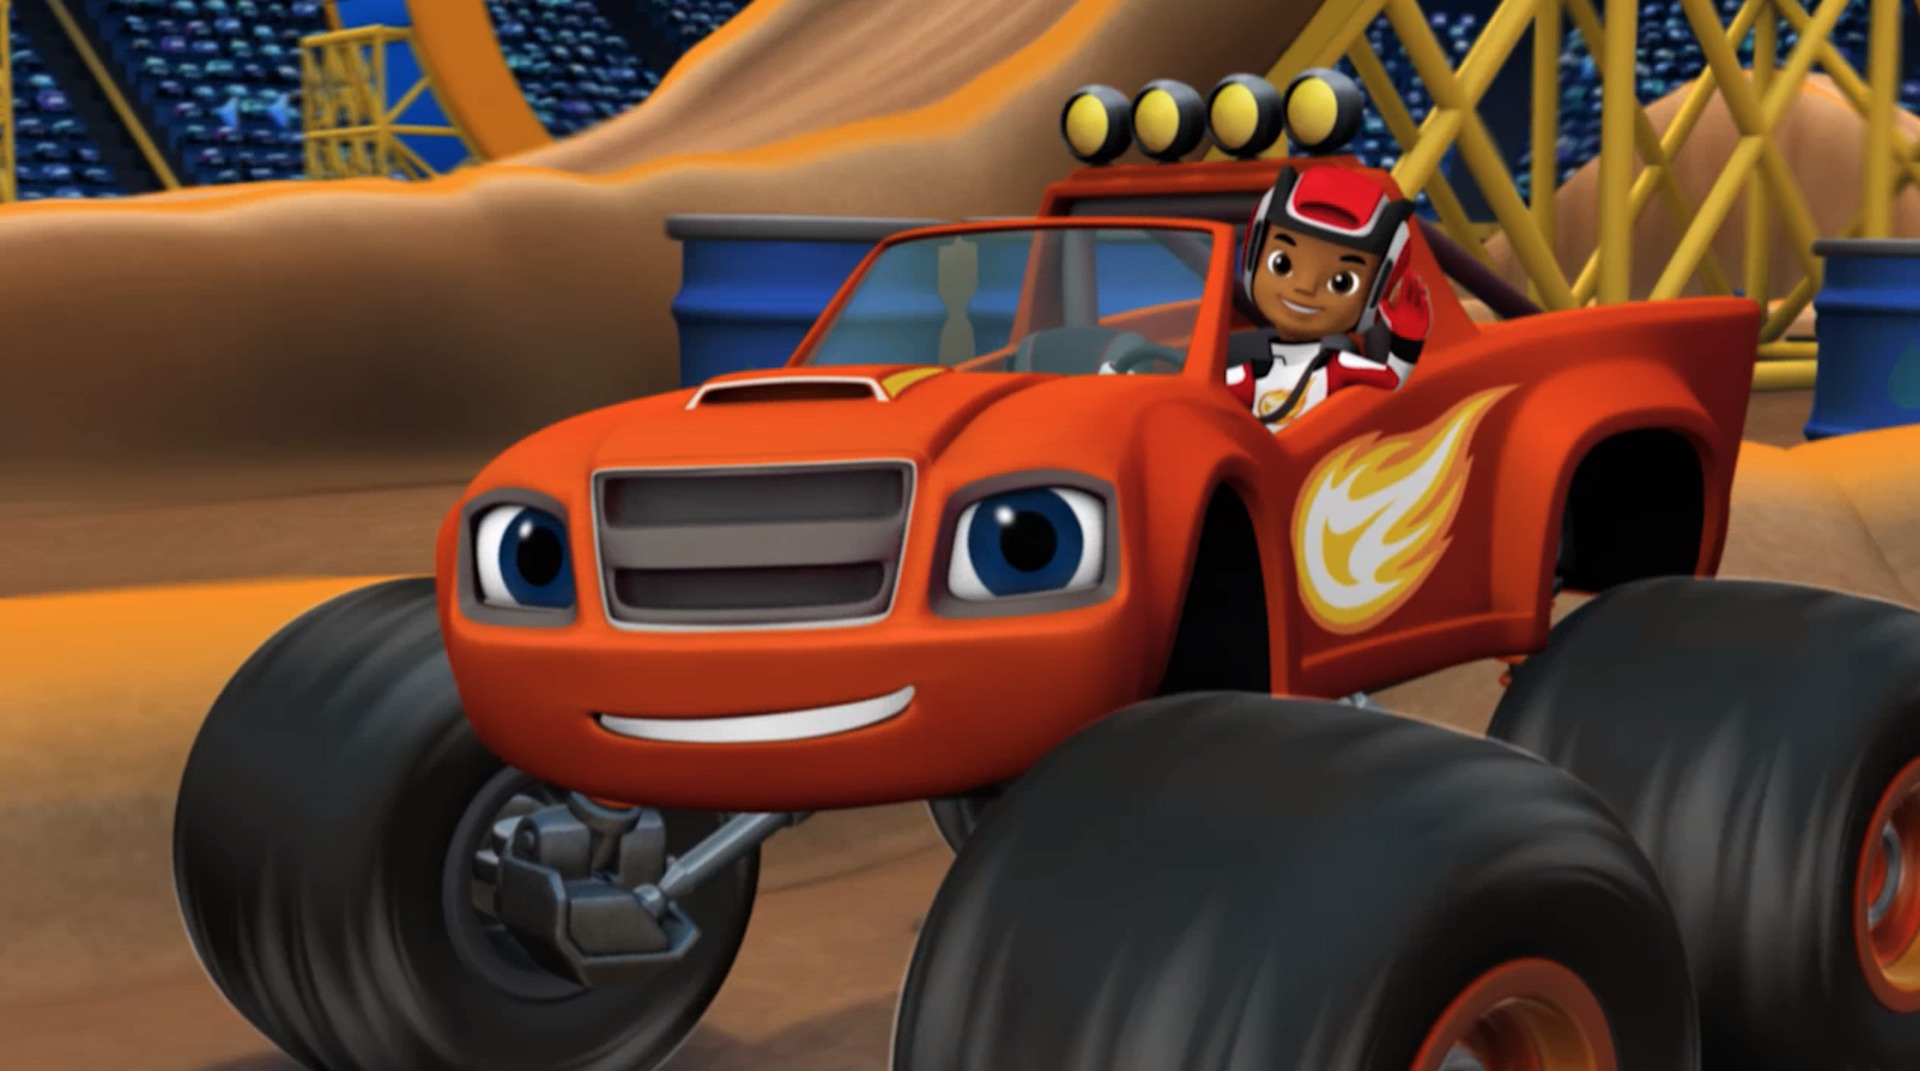 Watch Blaze and the Monster Machines Season 1 Episode 2: The Driving Force  - Full show on Paramount Plus